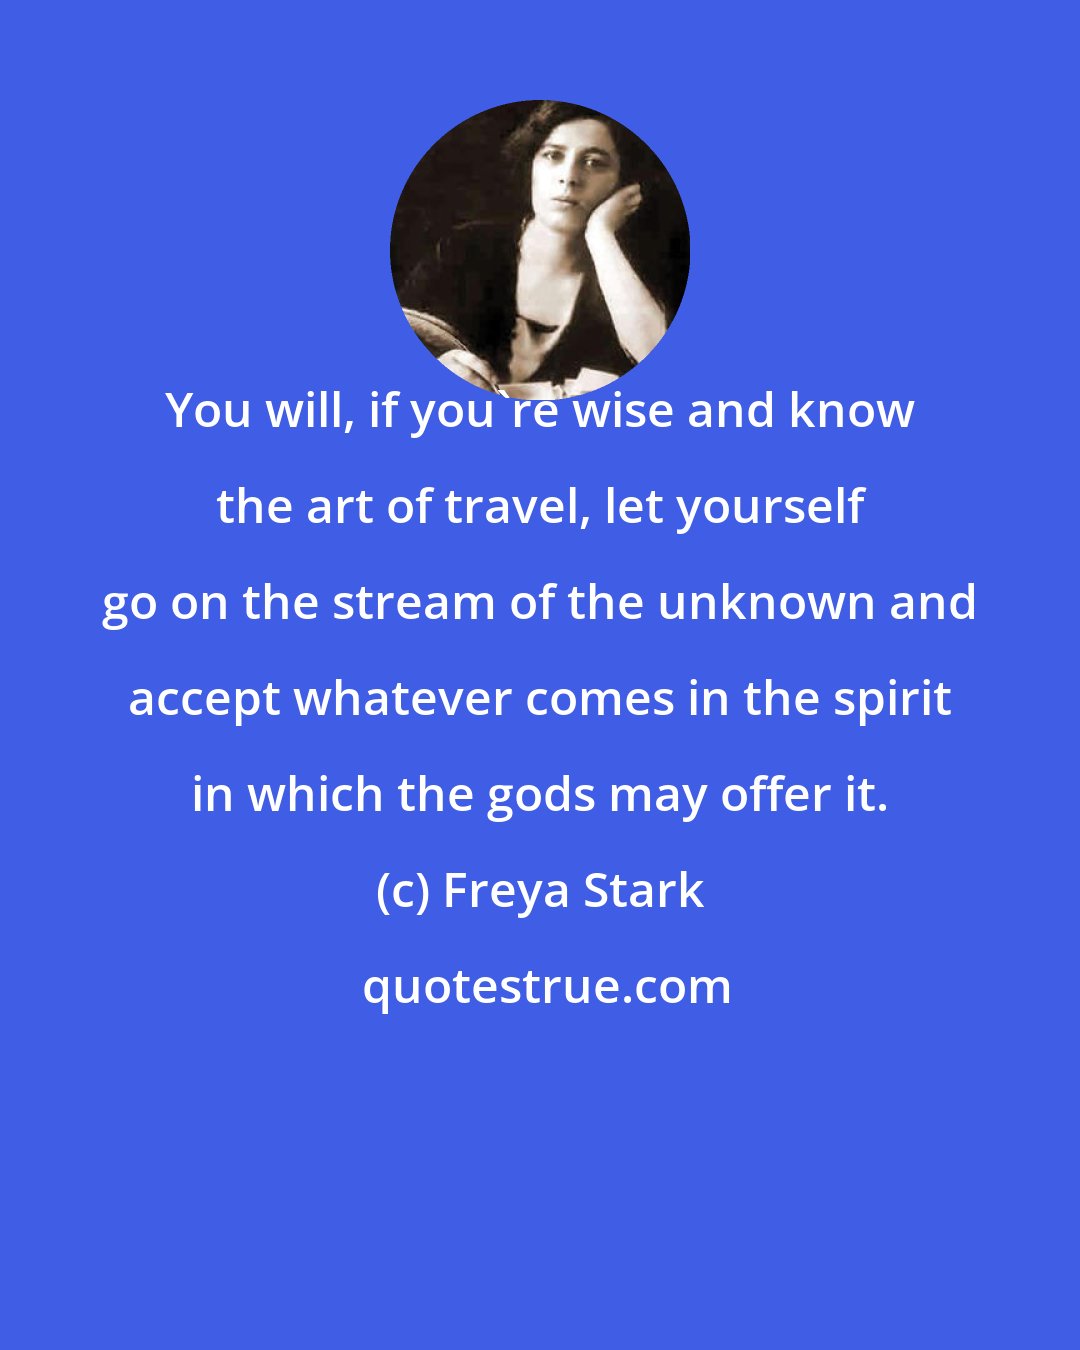 Freya Stark: You will, if you're wise and know the art of travel, let yourself go on the stream of the unknown and accept whatever comes in the spirit in which the gods may offer it.